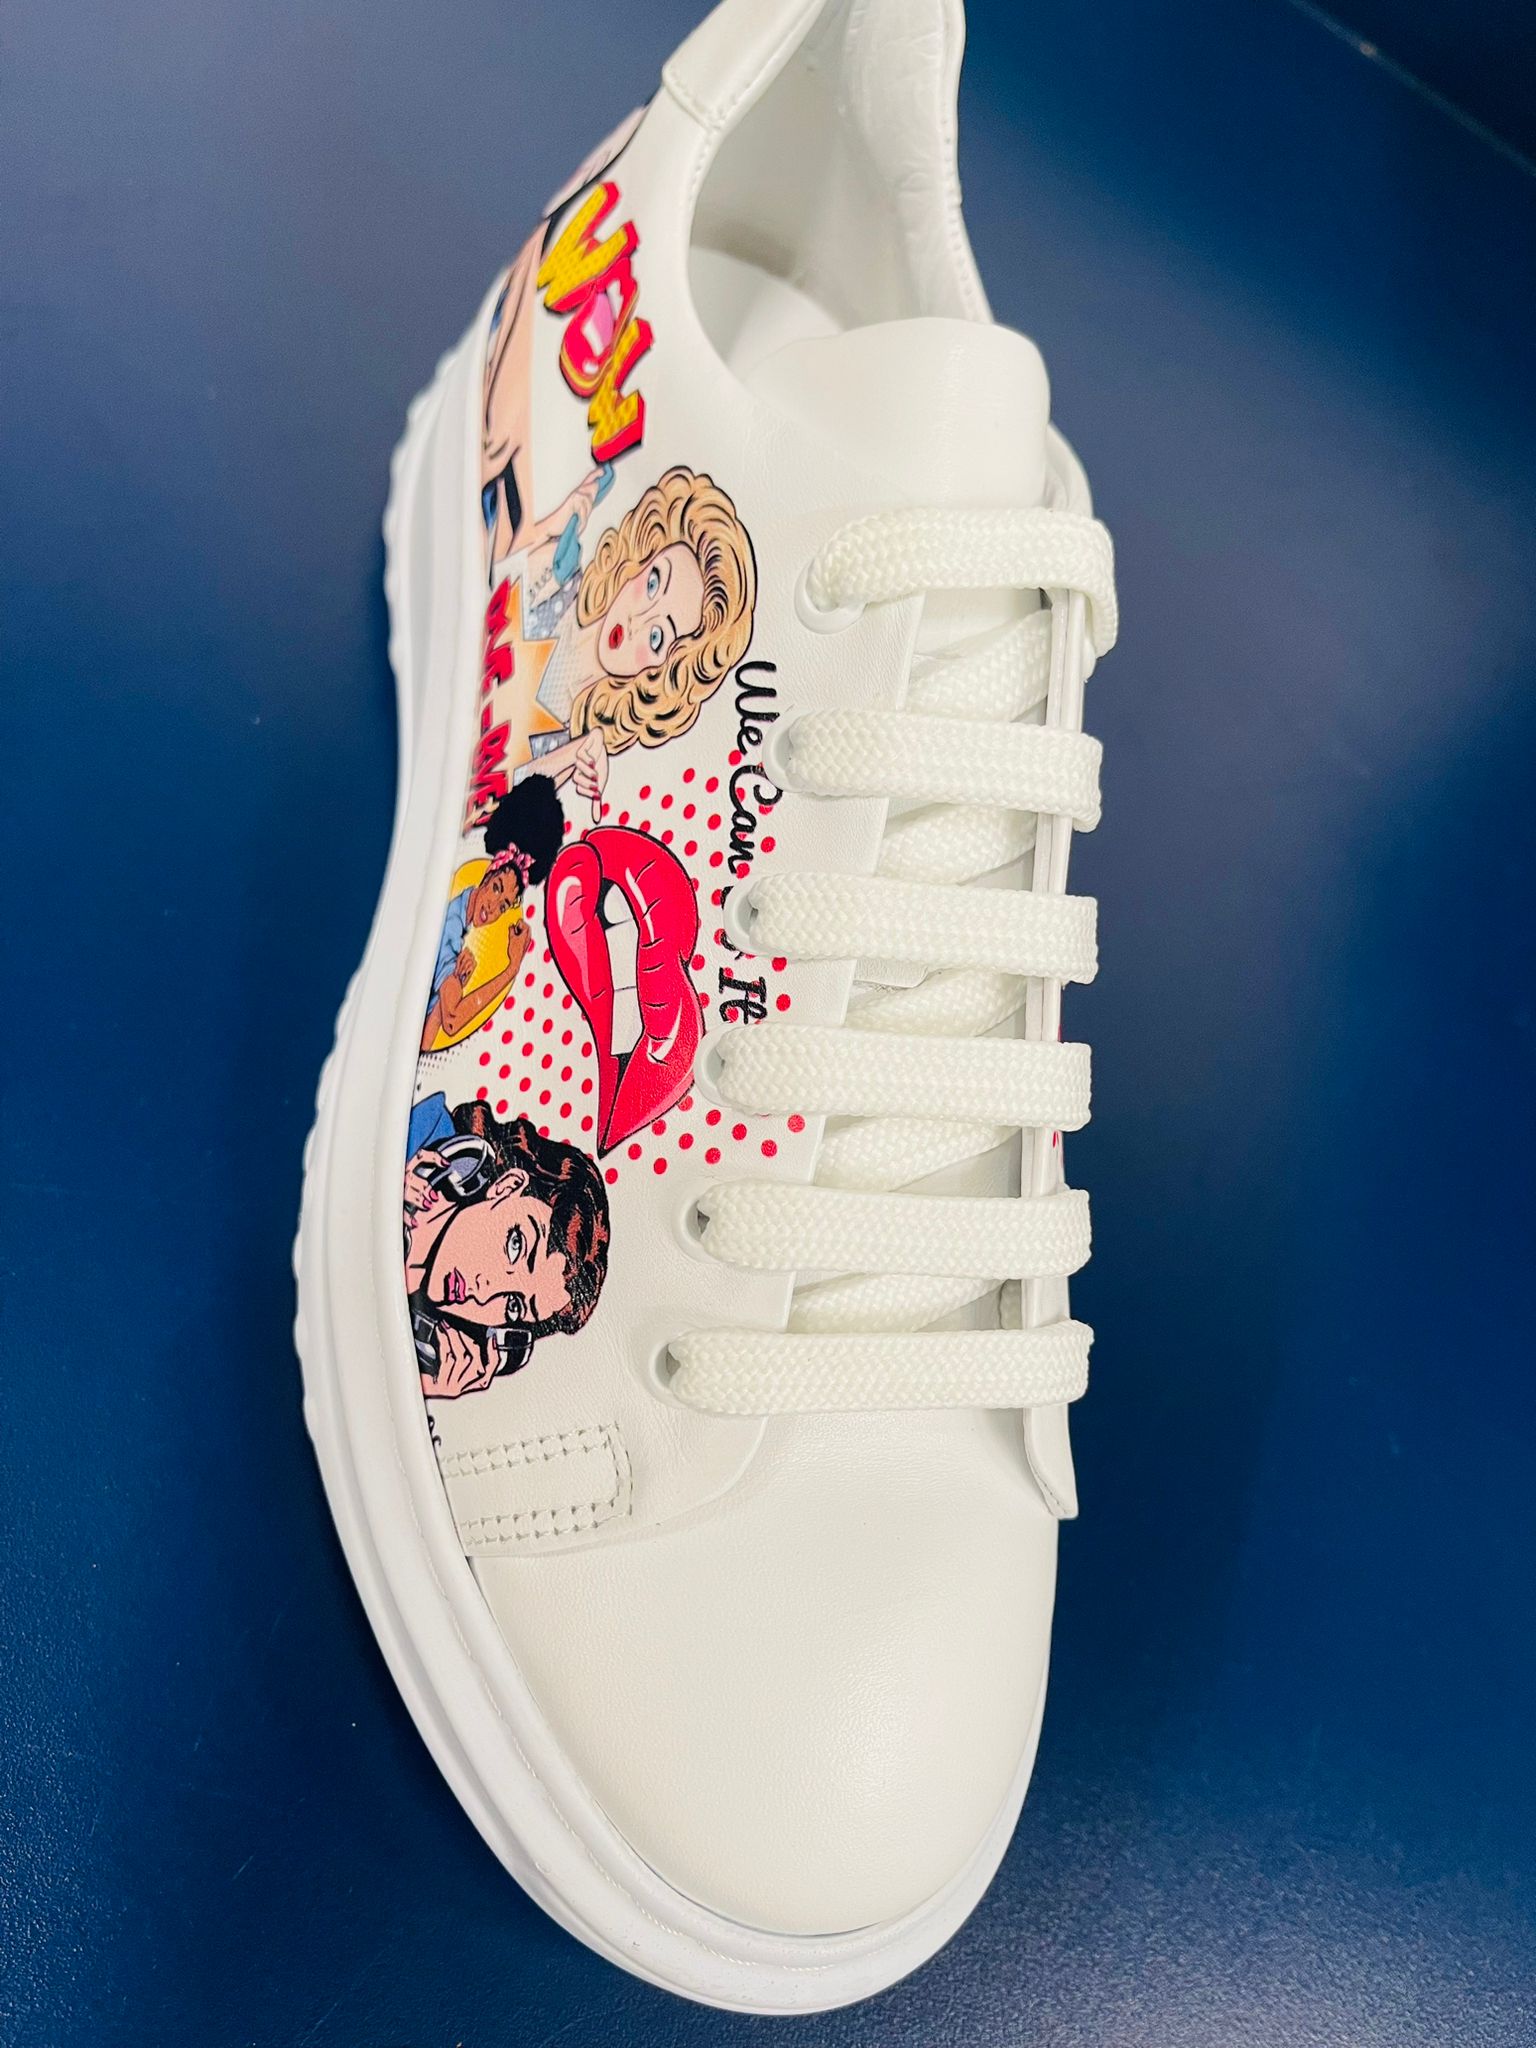 White Tennis Shoes With Barbie Design